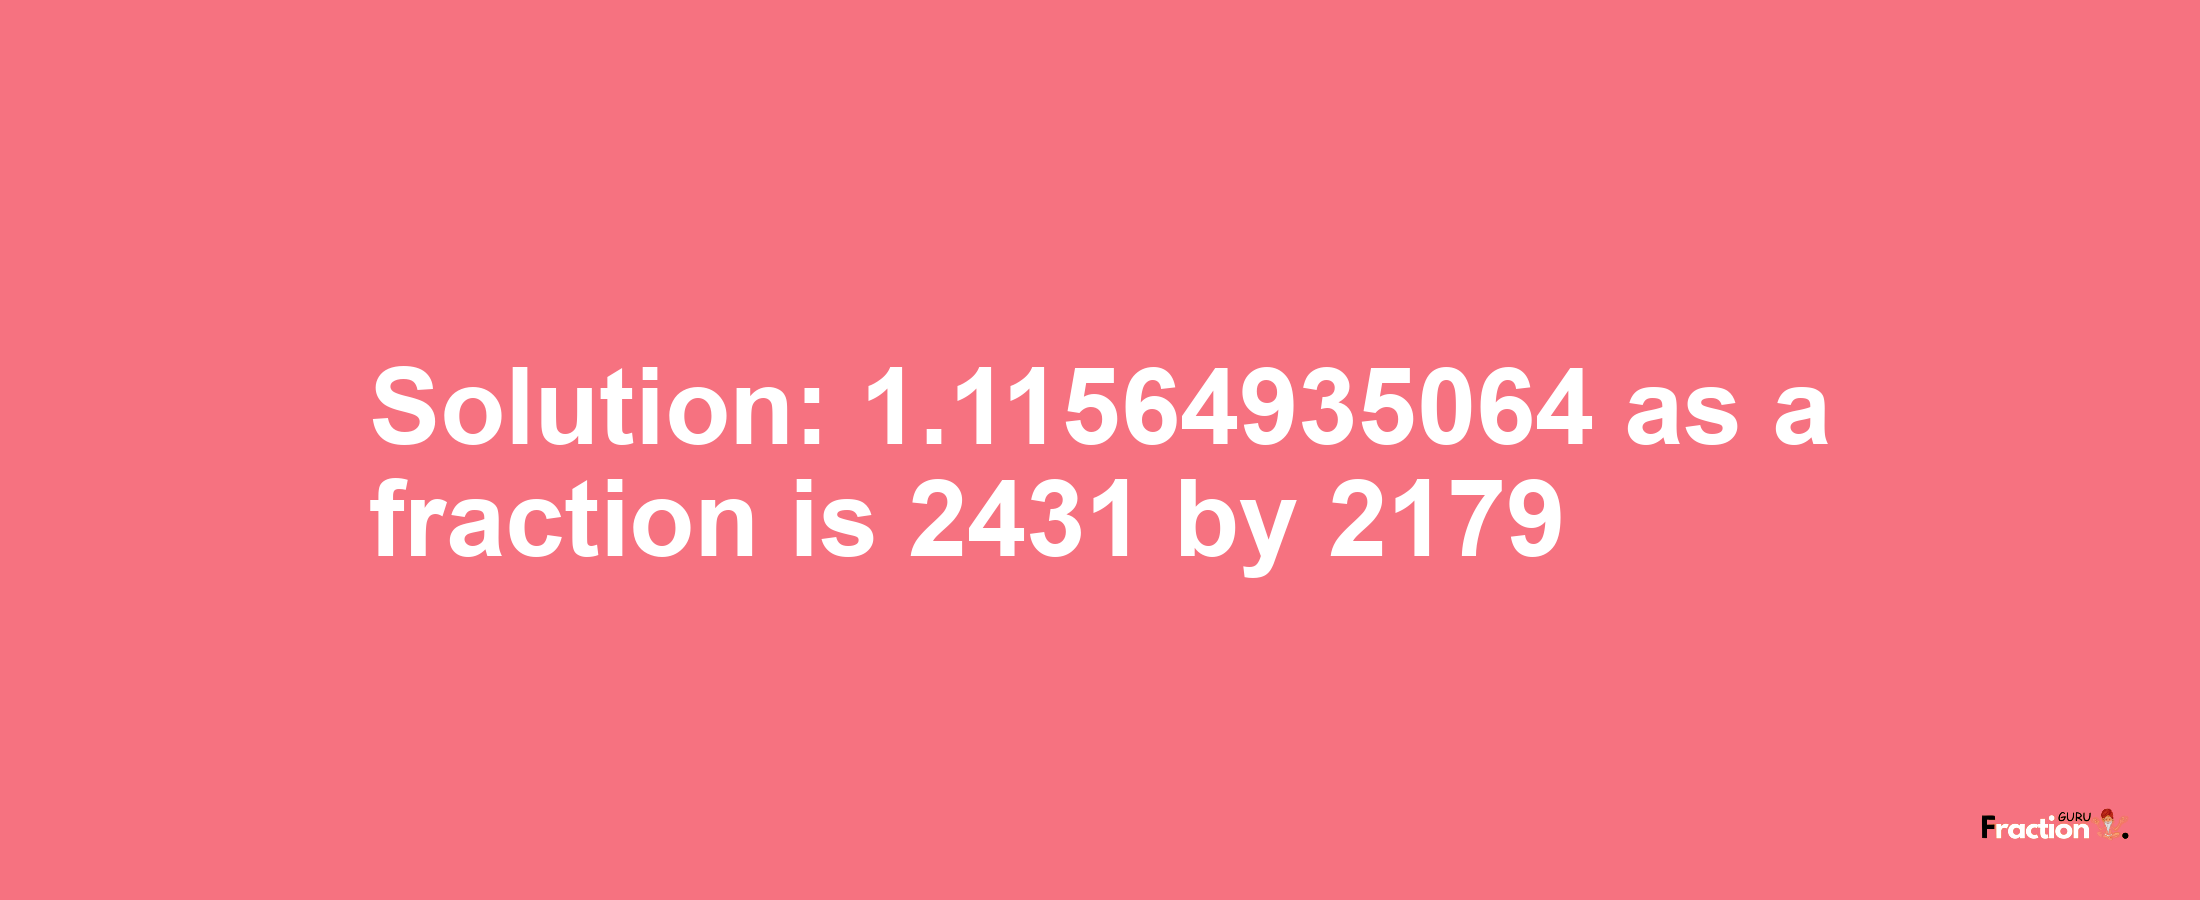 Solution:1.11564935064 as a fraction is 2431/2179